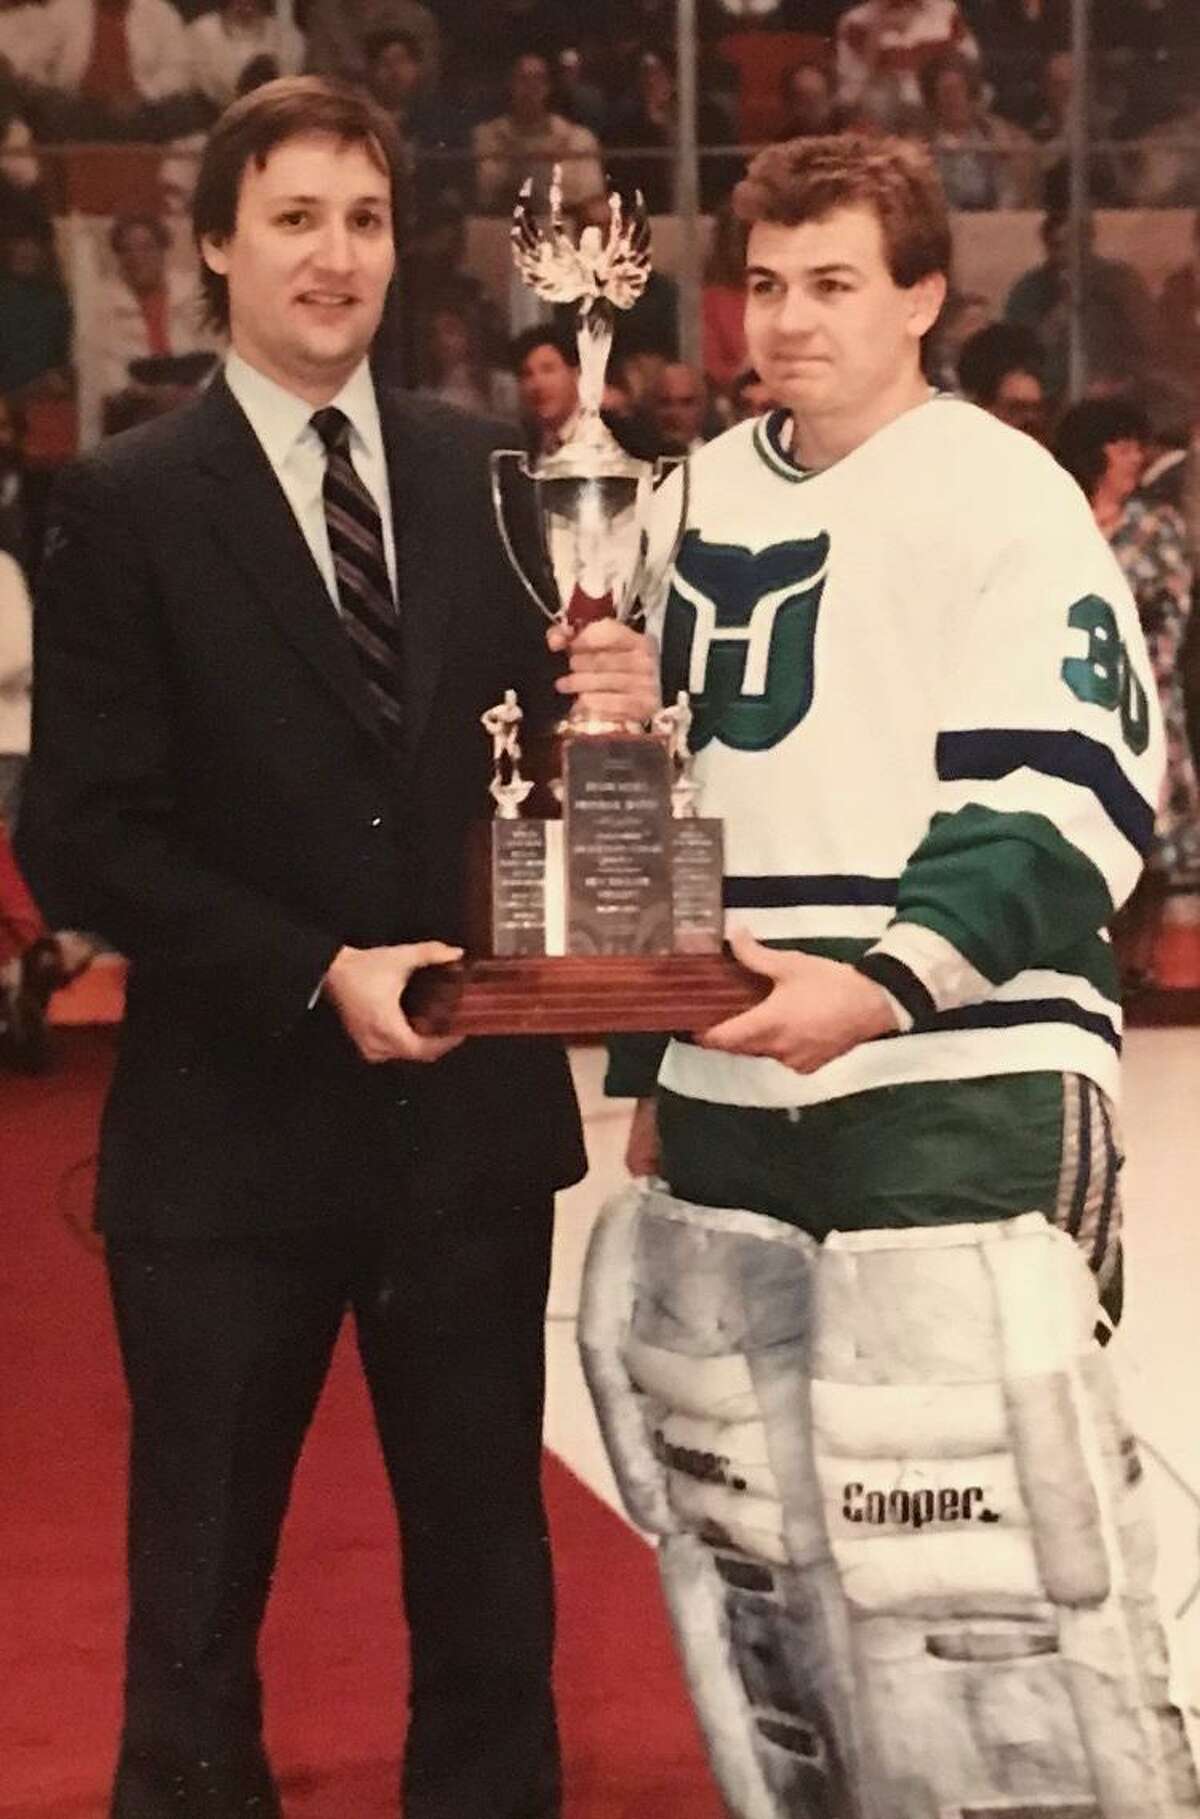 Columnist Jeff Jacobs presents Hartford Whalers goalie Peter Sidorkiewicz with an award in 1989.